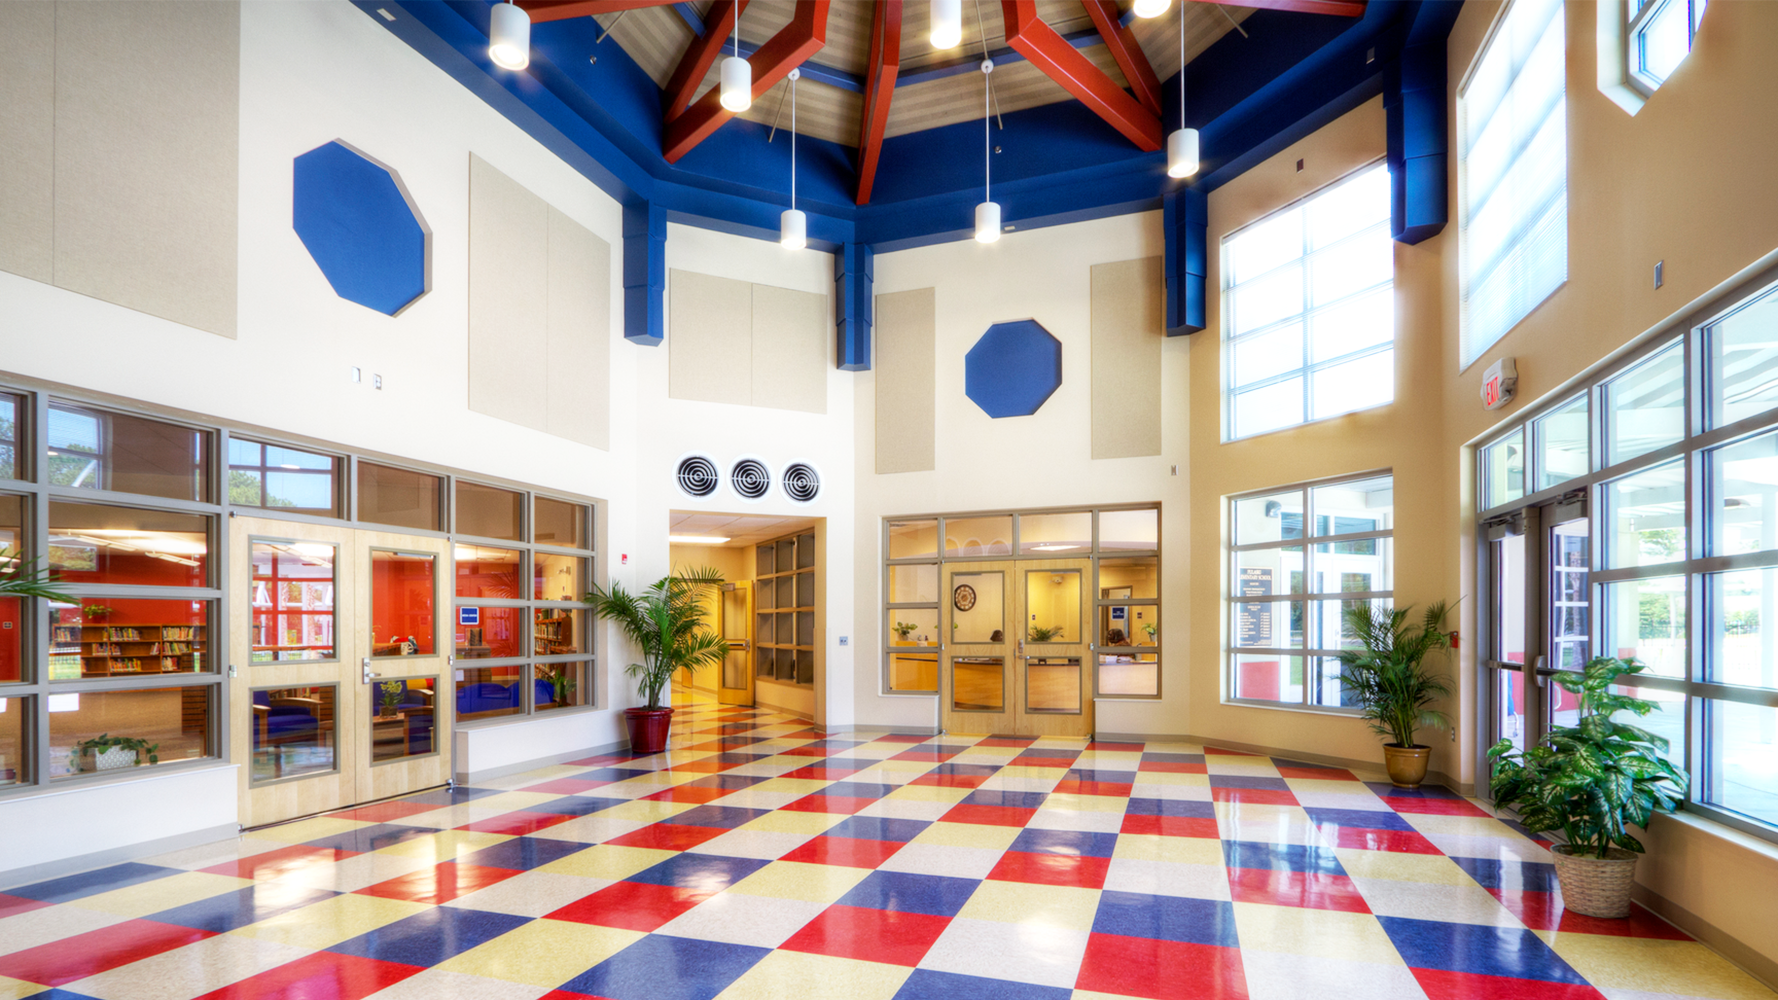 School entrance with red/blue/white checkered floor and white/blue walls